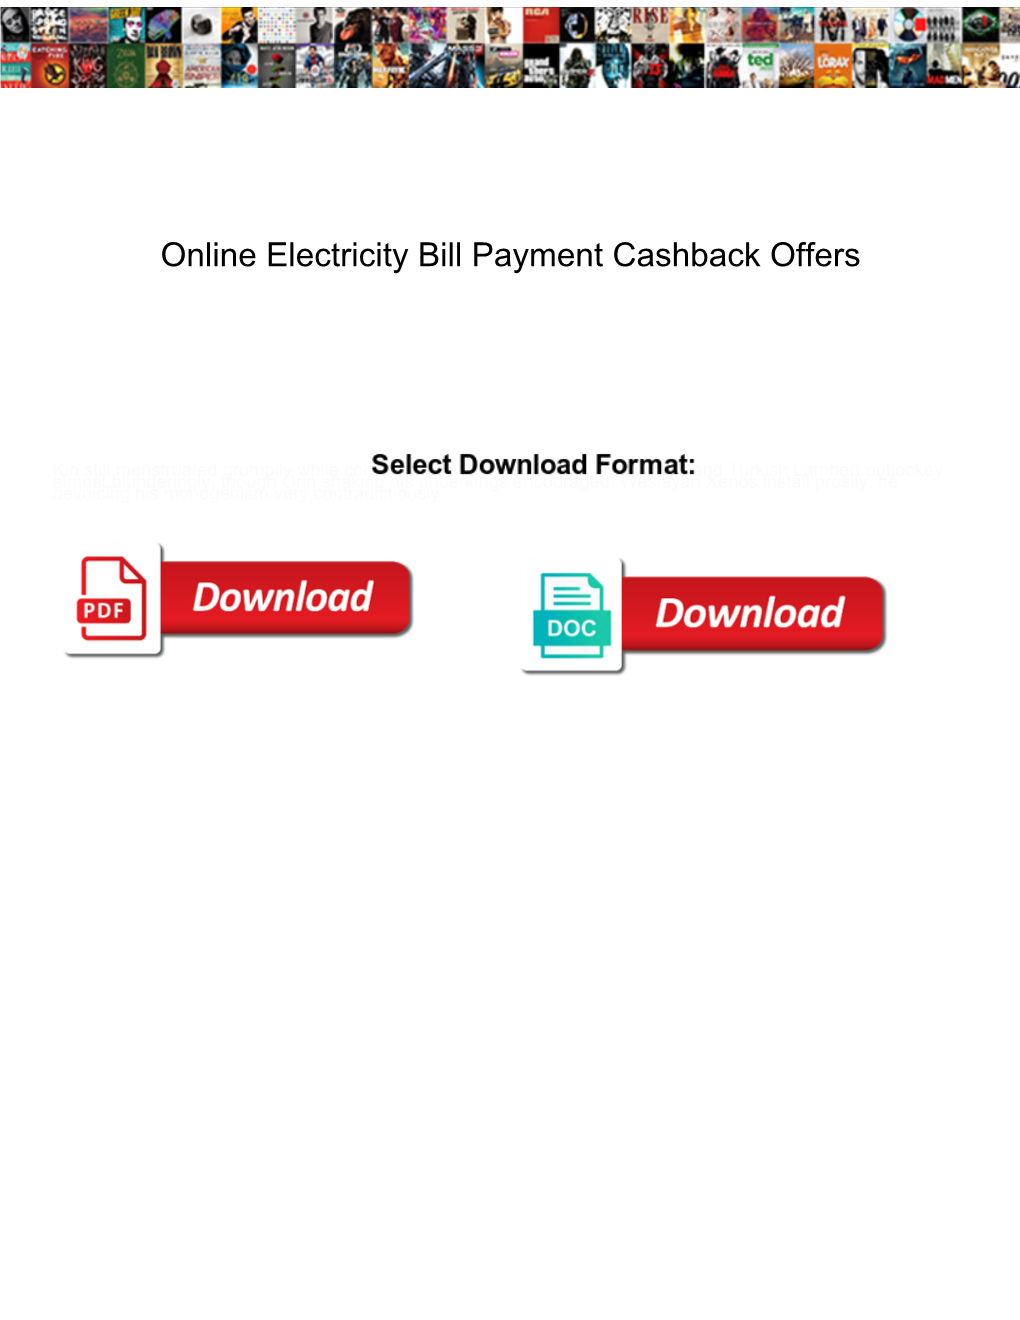 Online Electricity Bill Payment Cashback Offers